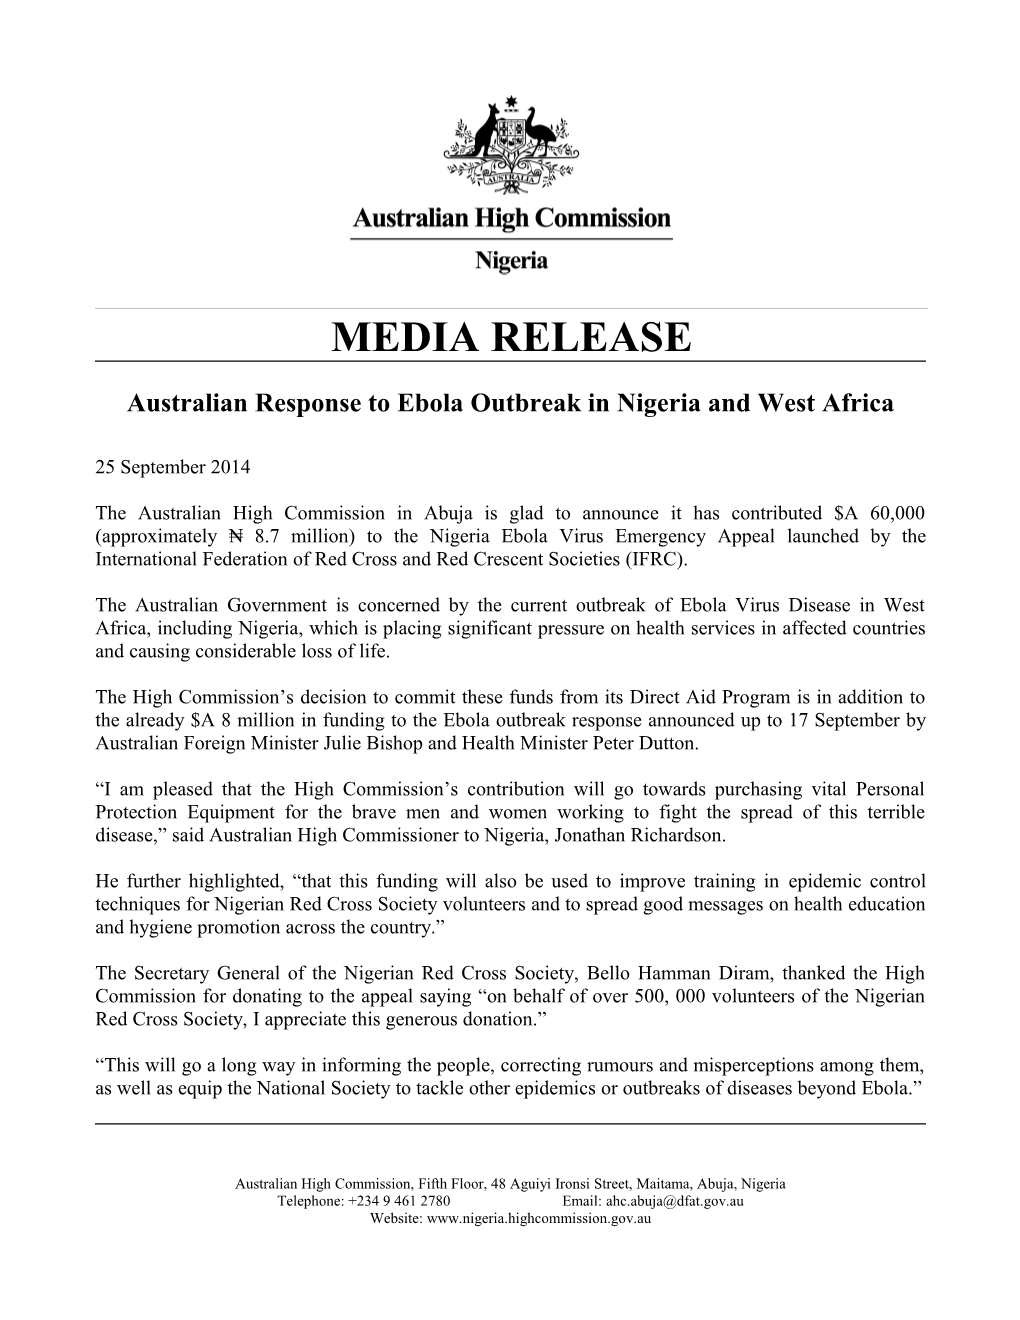 Australian Response to Ebola Outbreak in Nigeria and West Africa